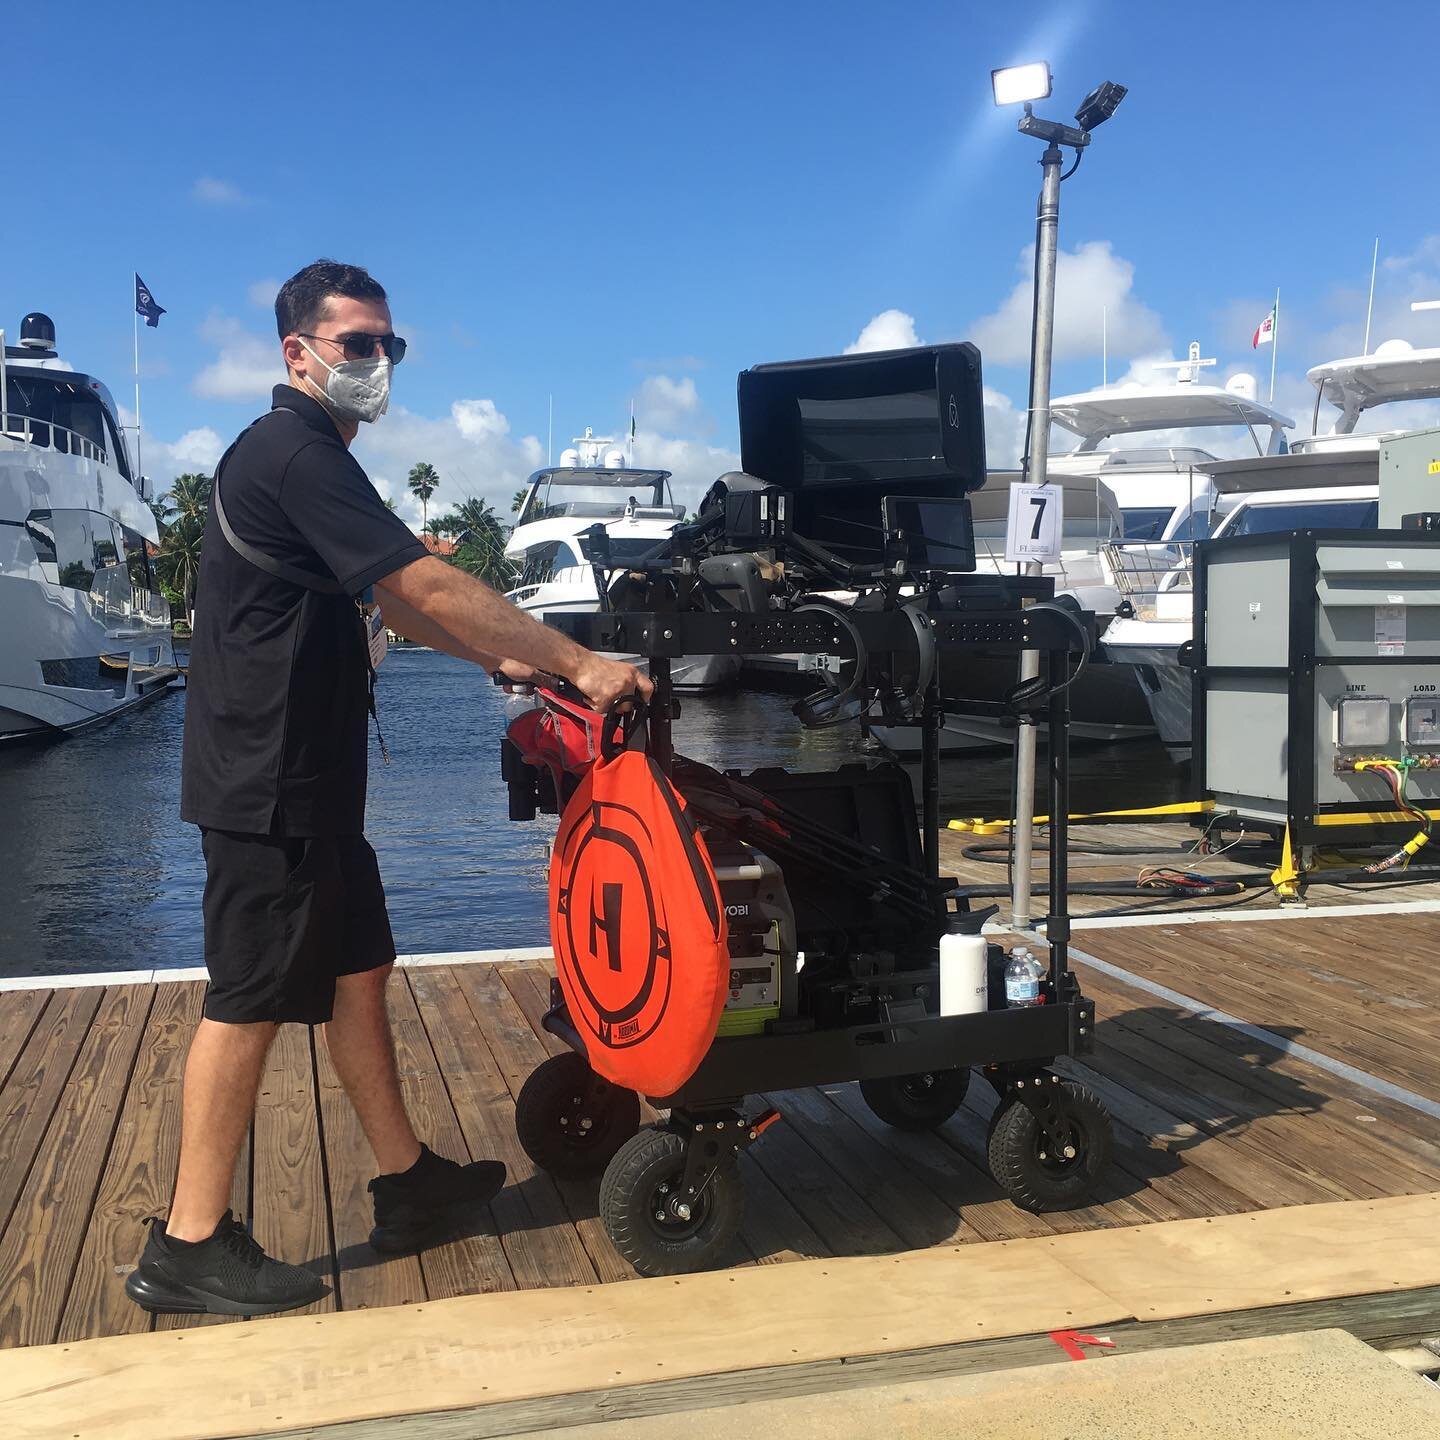 Just wrapped two days with @nbcsports on our third year covering the @flibsofficial Fort Lauderdale International Boat Show.  Check out the broadcast this Sunday at 4:30PM.